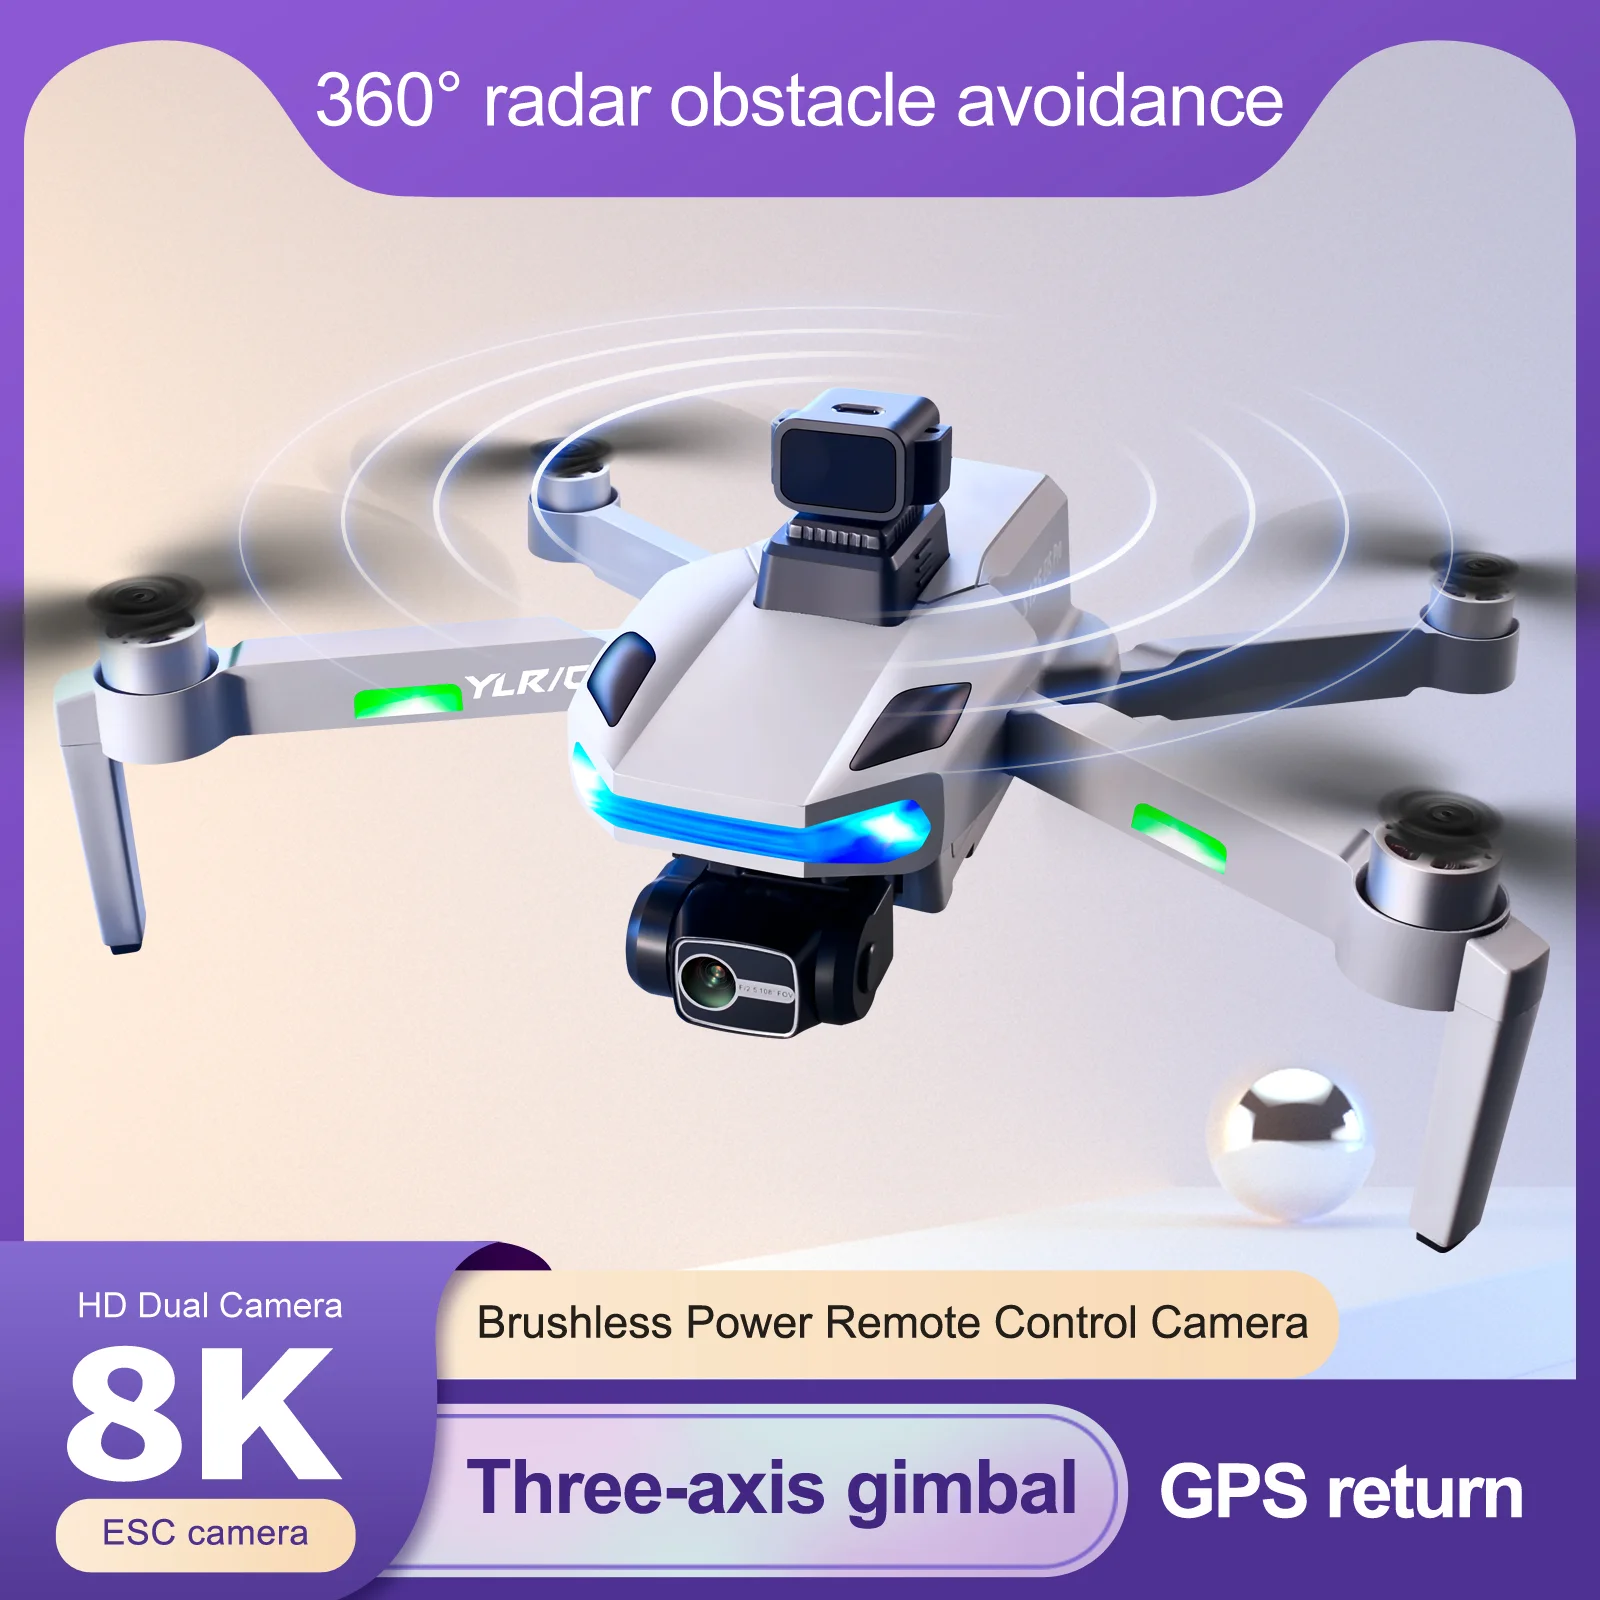 

KBDFA S135 GPS Positioning Automatic Return Drone Three-Axis Gimbal Anti-Shake Professional Aerial Photography Aircraft Toy Gift